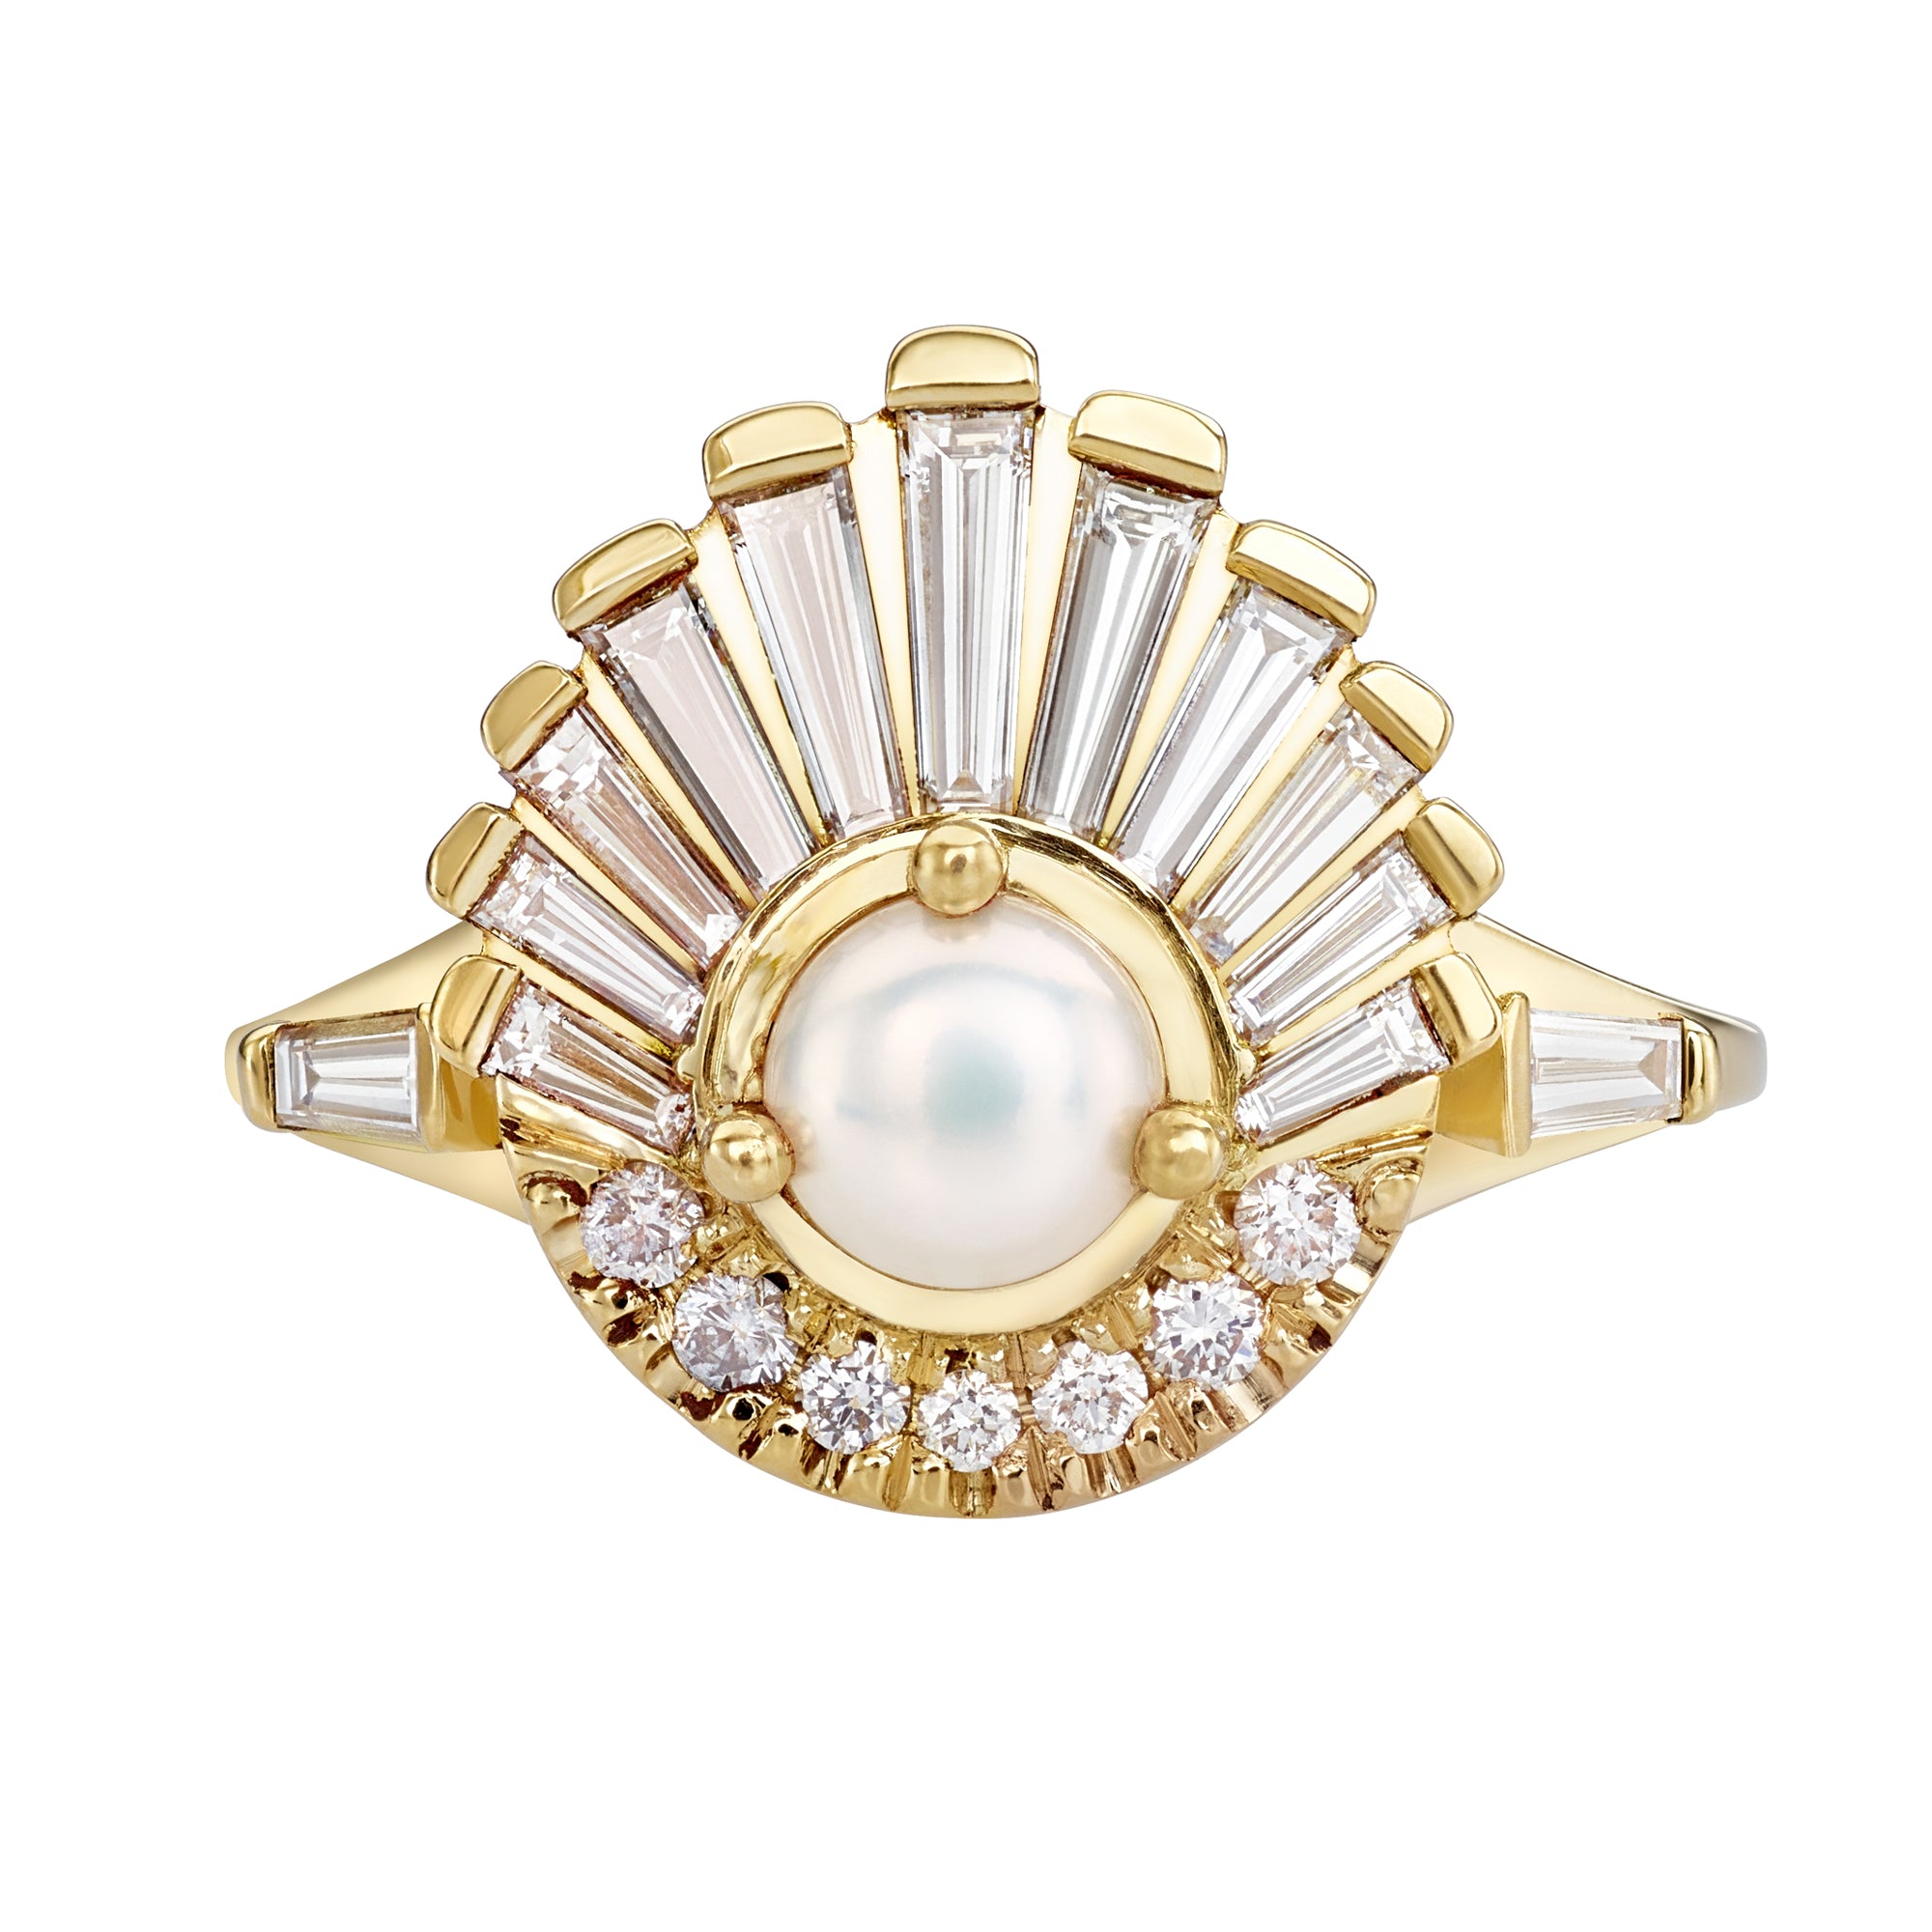 Diamond-and-Pearl-Engagement-Ring-Baguette-Diamond-Shell-Ring-closeup